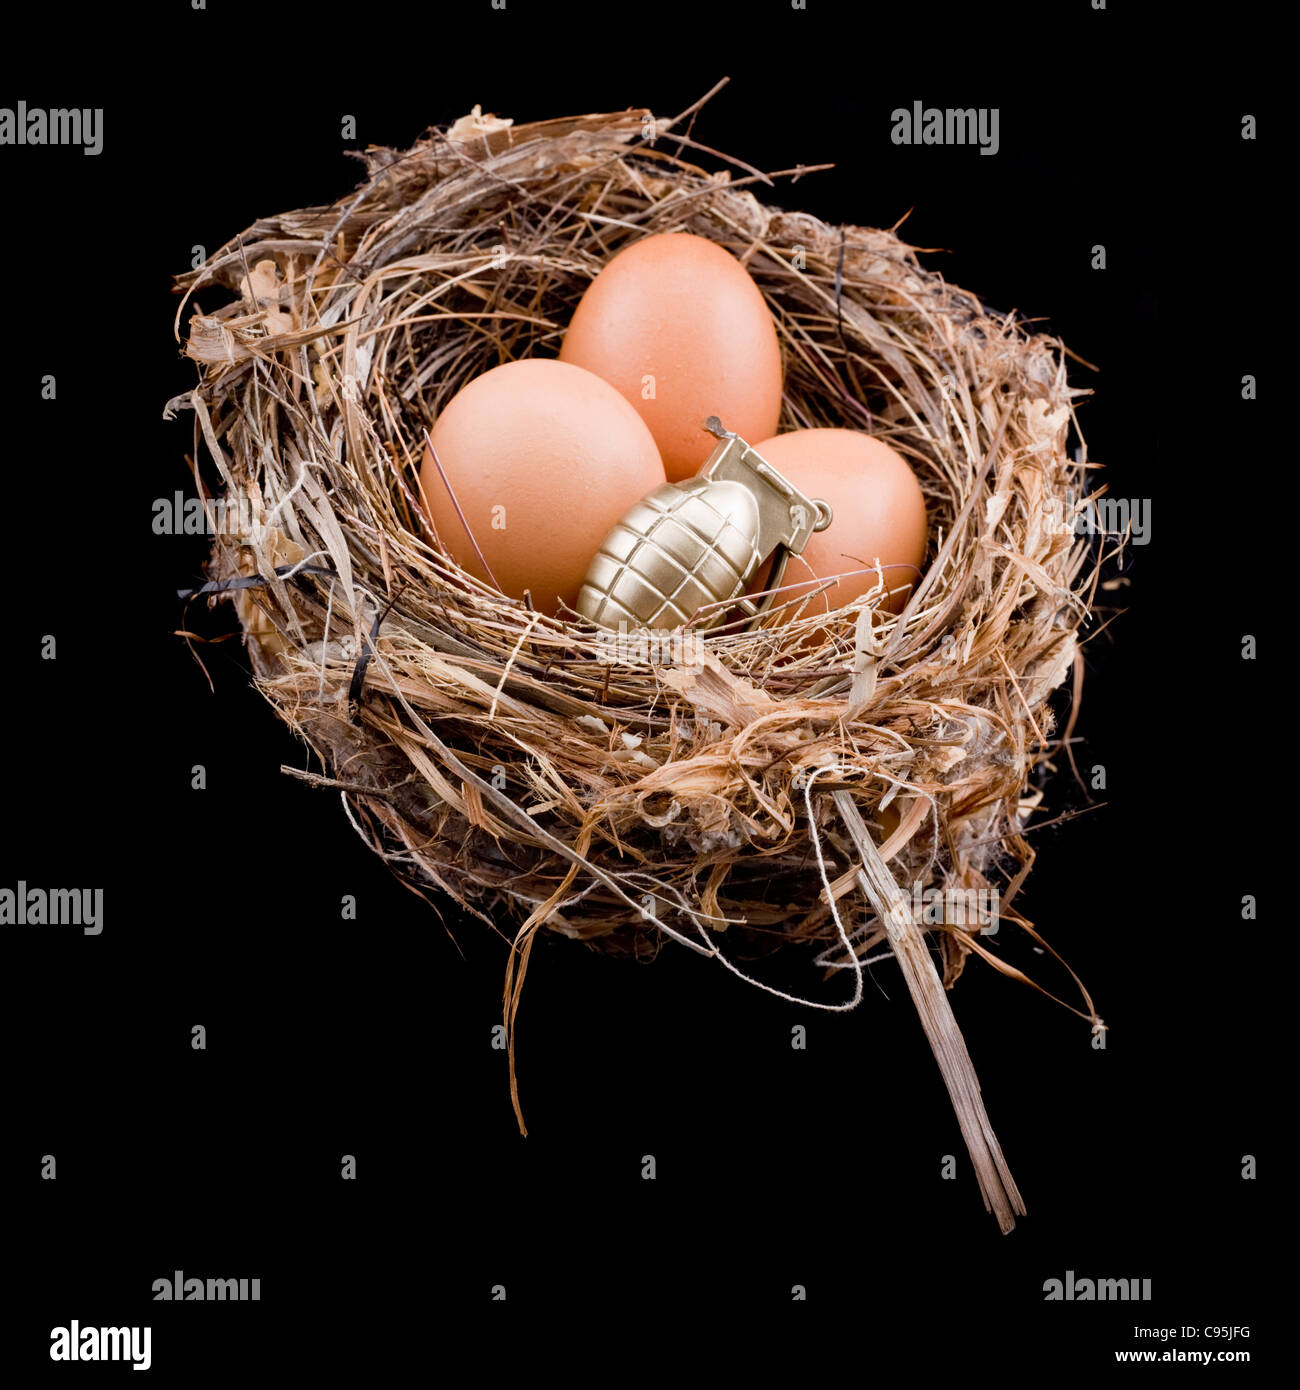 3 x eggs with 1 grenade sitting in a bird's nest Stock Photo